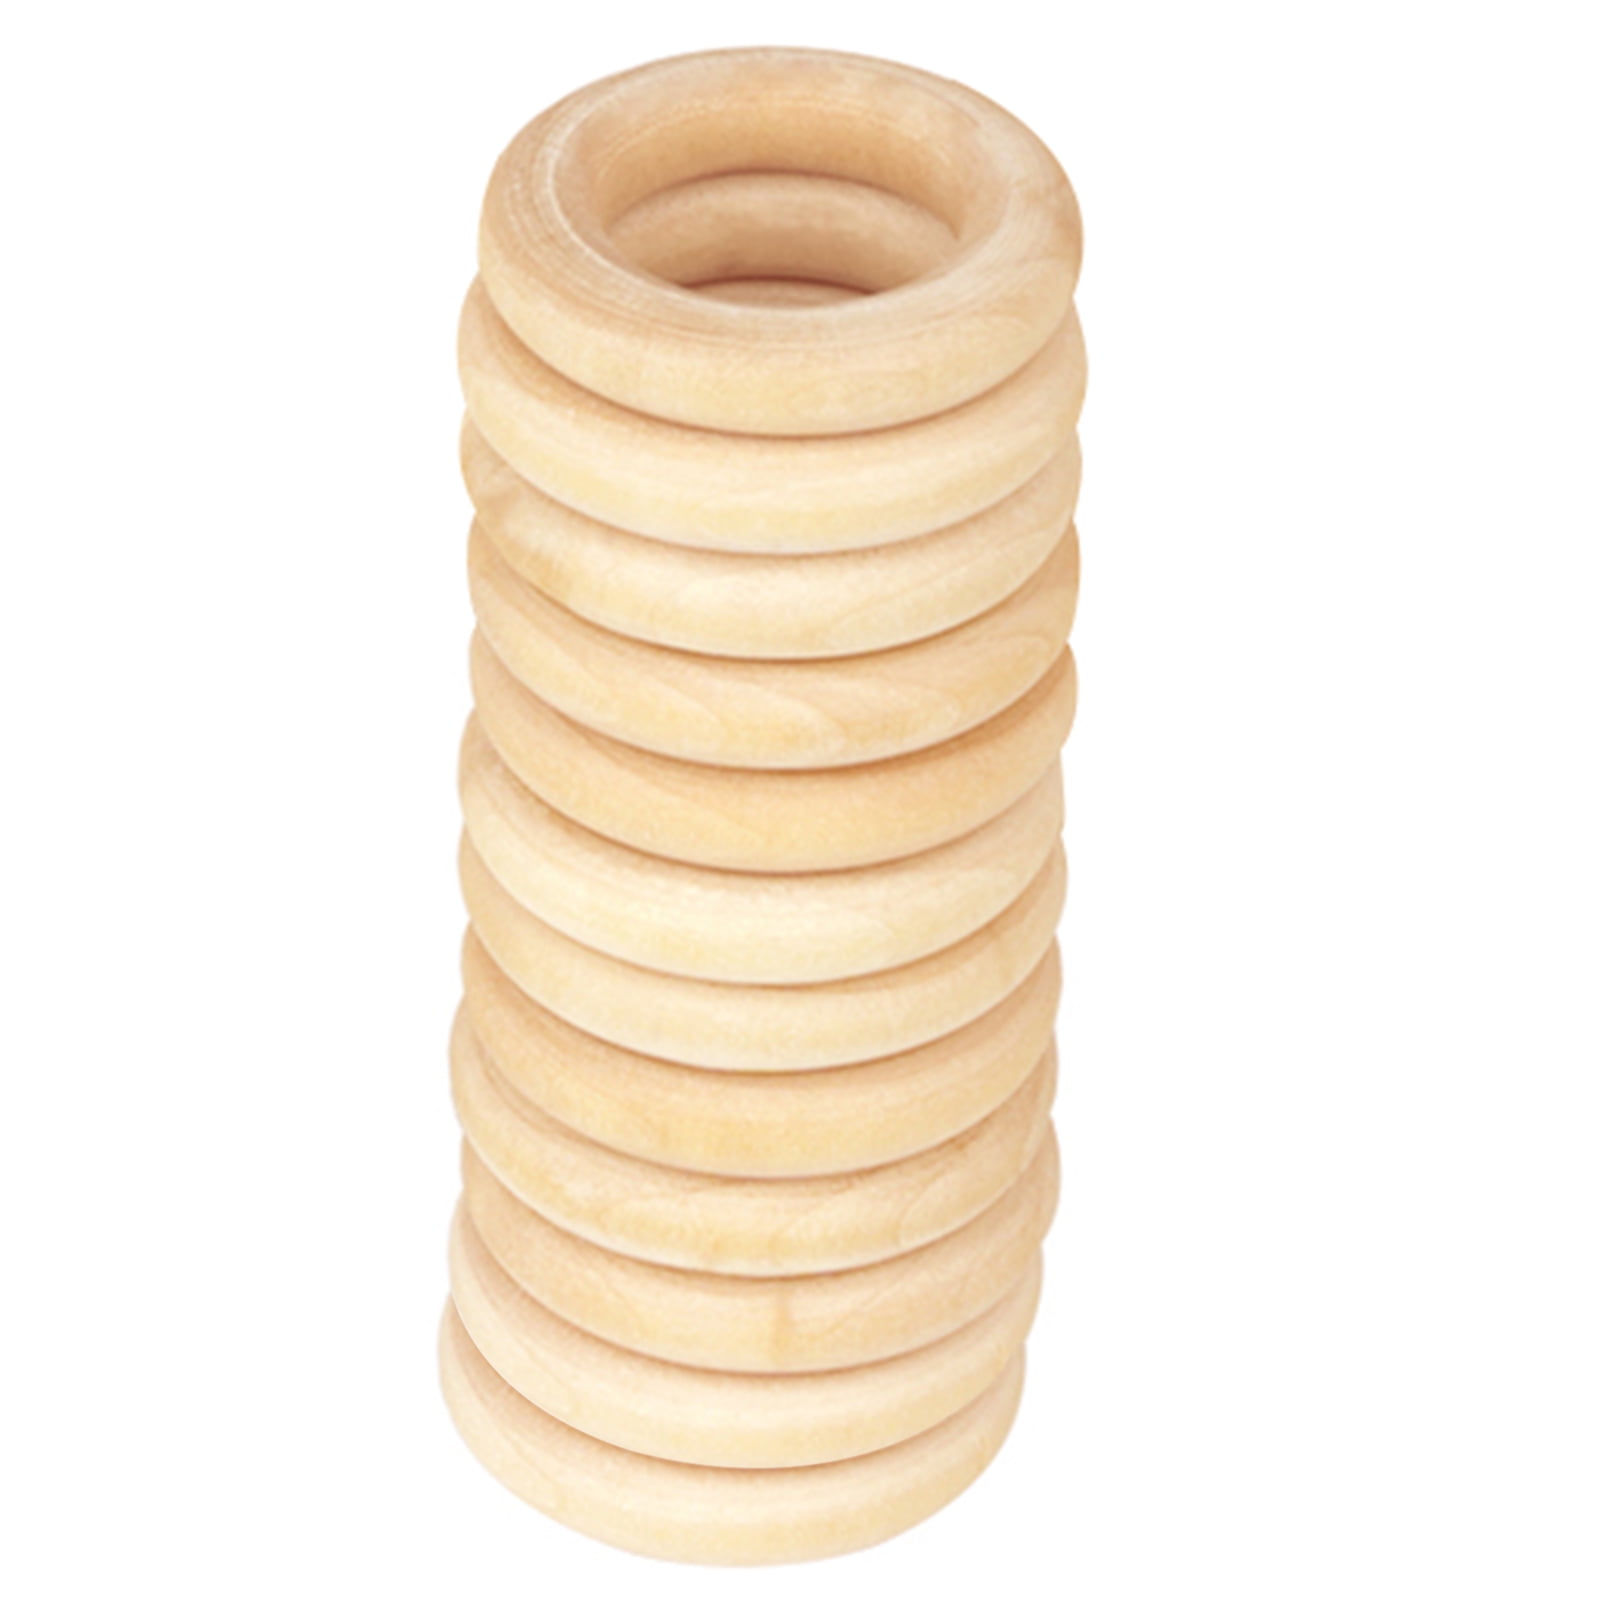 Craft County Unfinished Natural Wood Rings in Multiple Sizes & Packs for  DIY Crafts & Projects - Jewelry Making, Macrame Wall Hanging, Napkin Ring